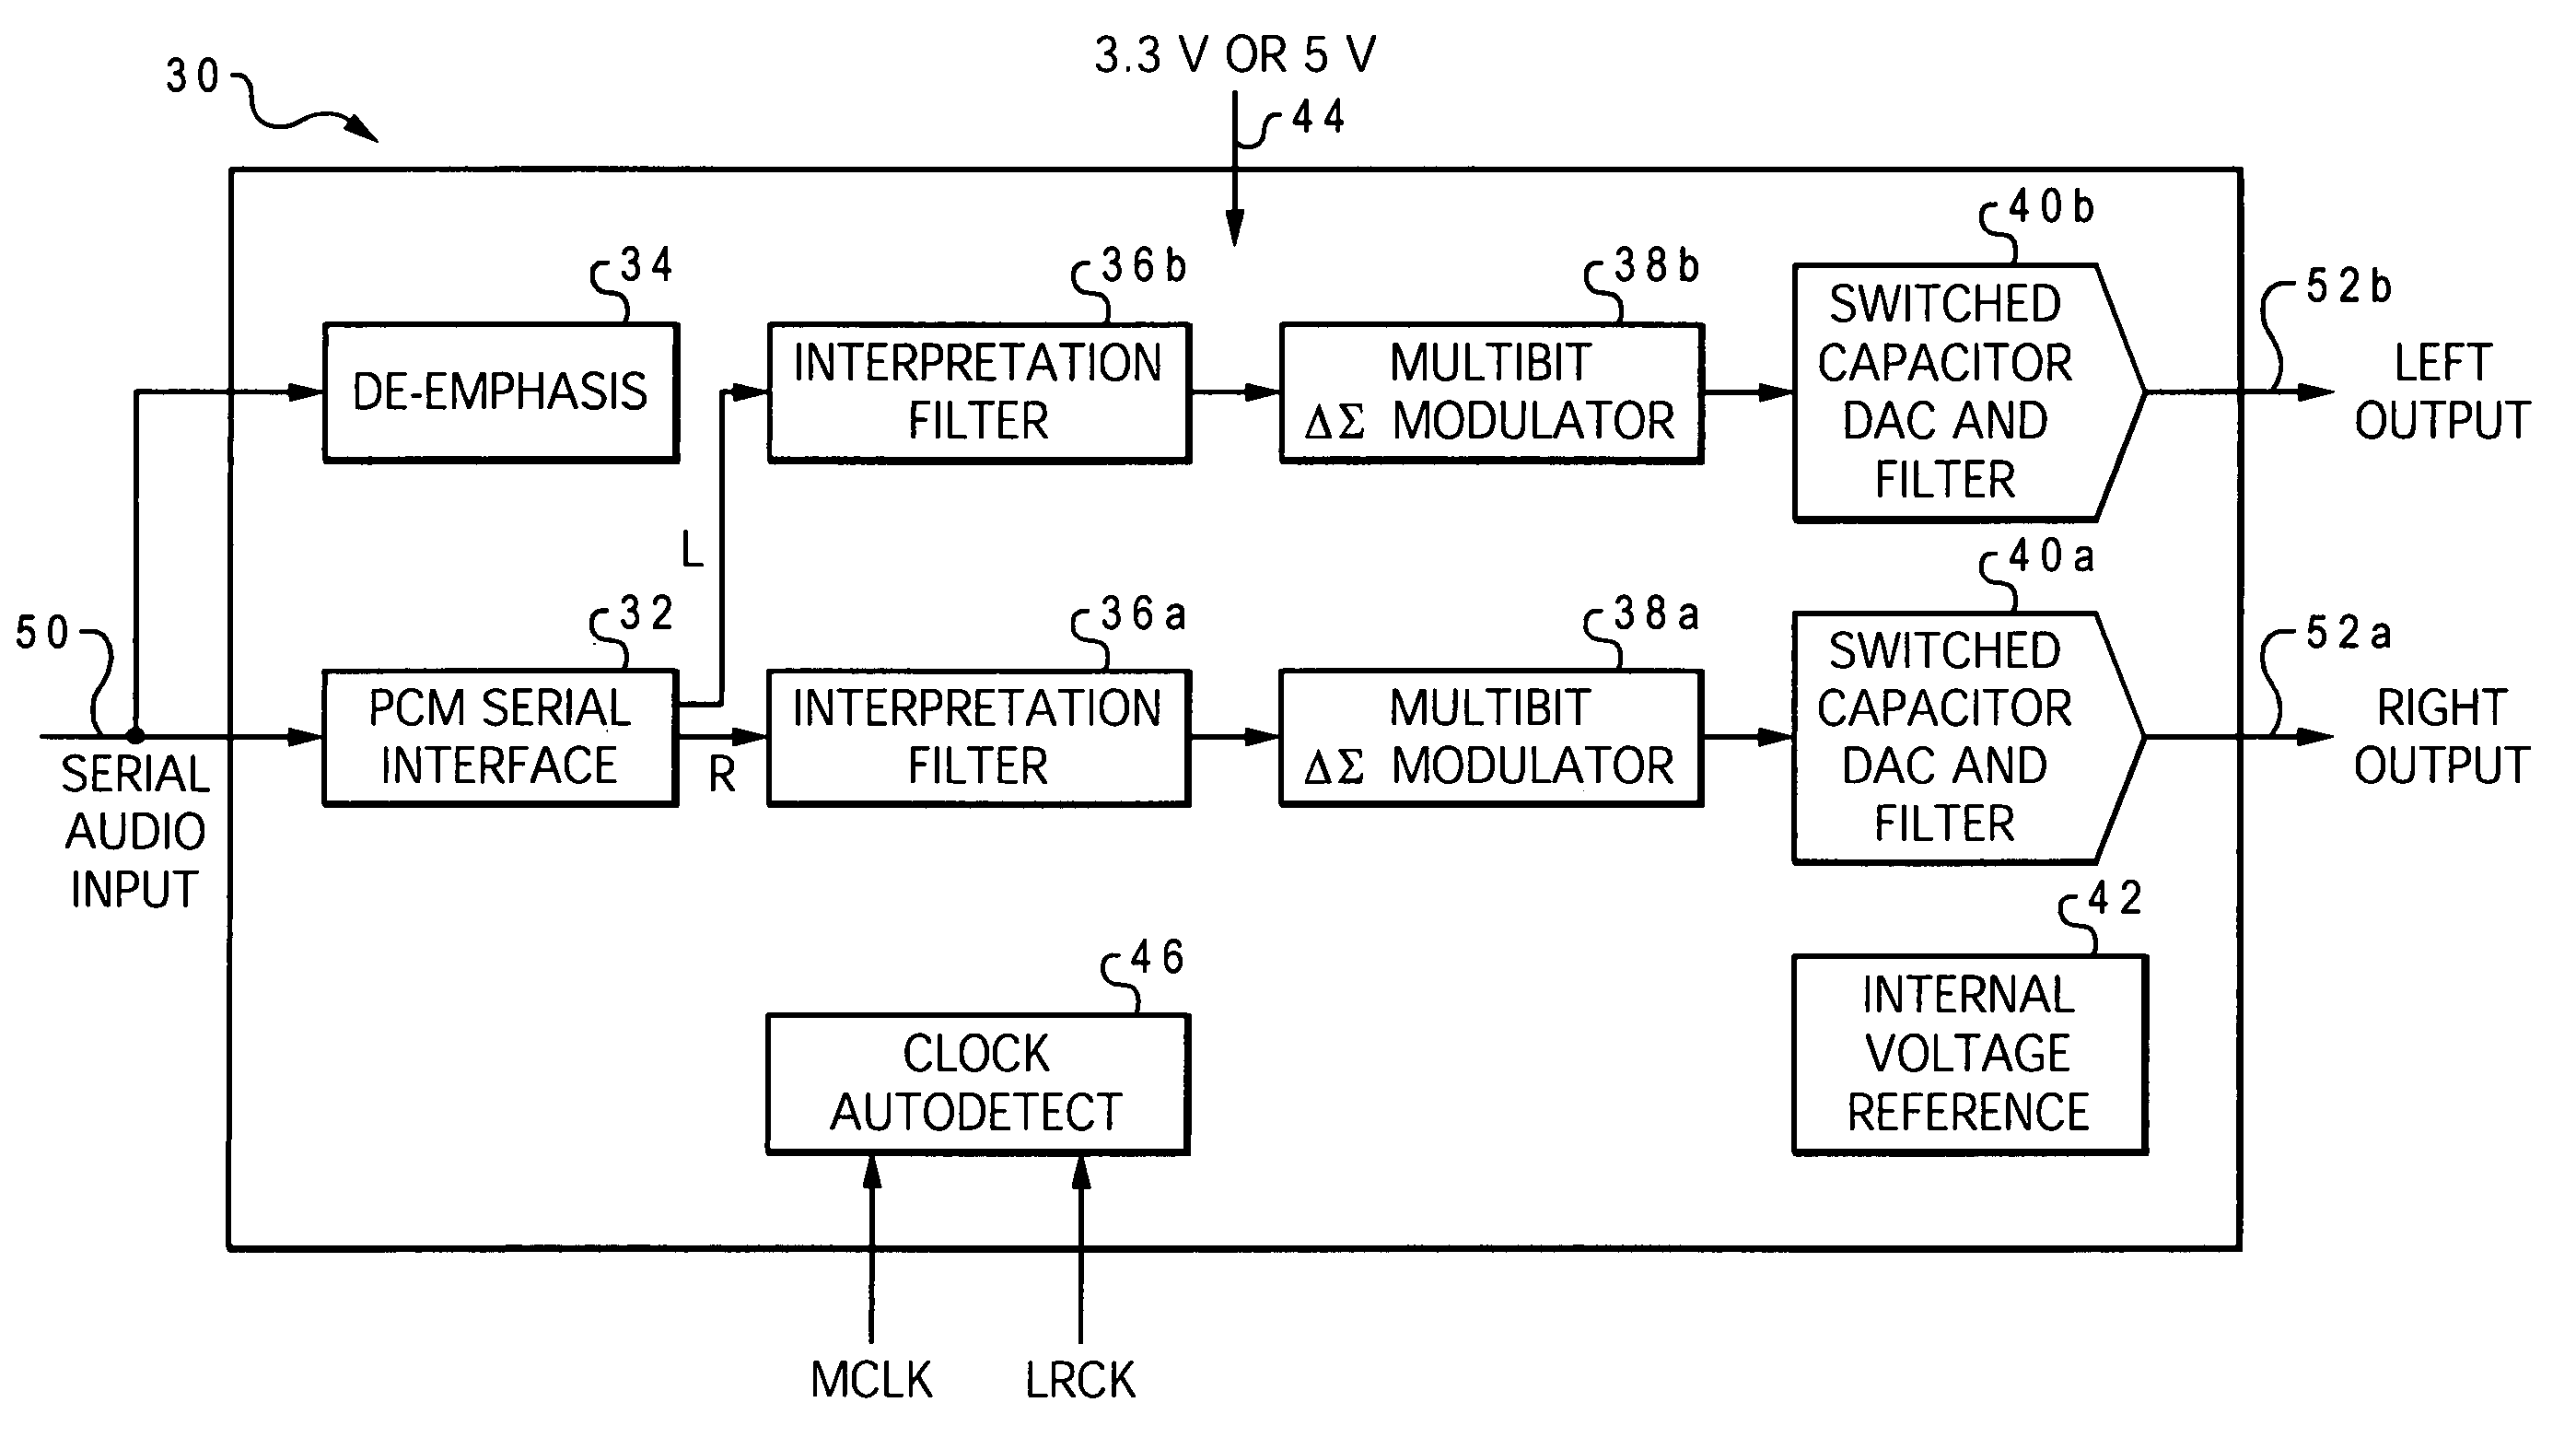 Scheme for determining internal mode using MCLK frequency autodetect